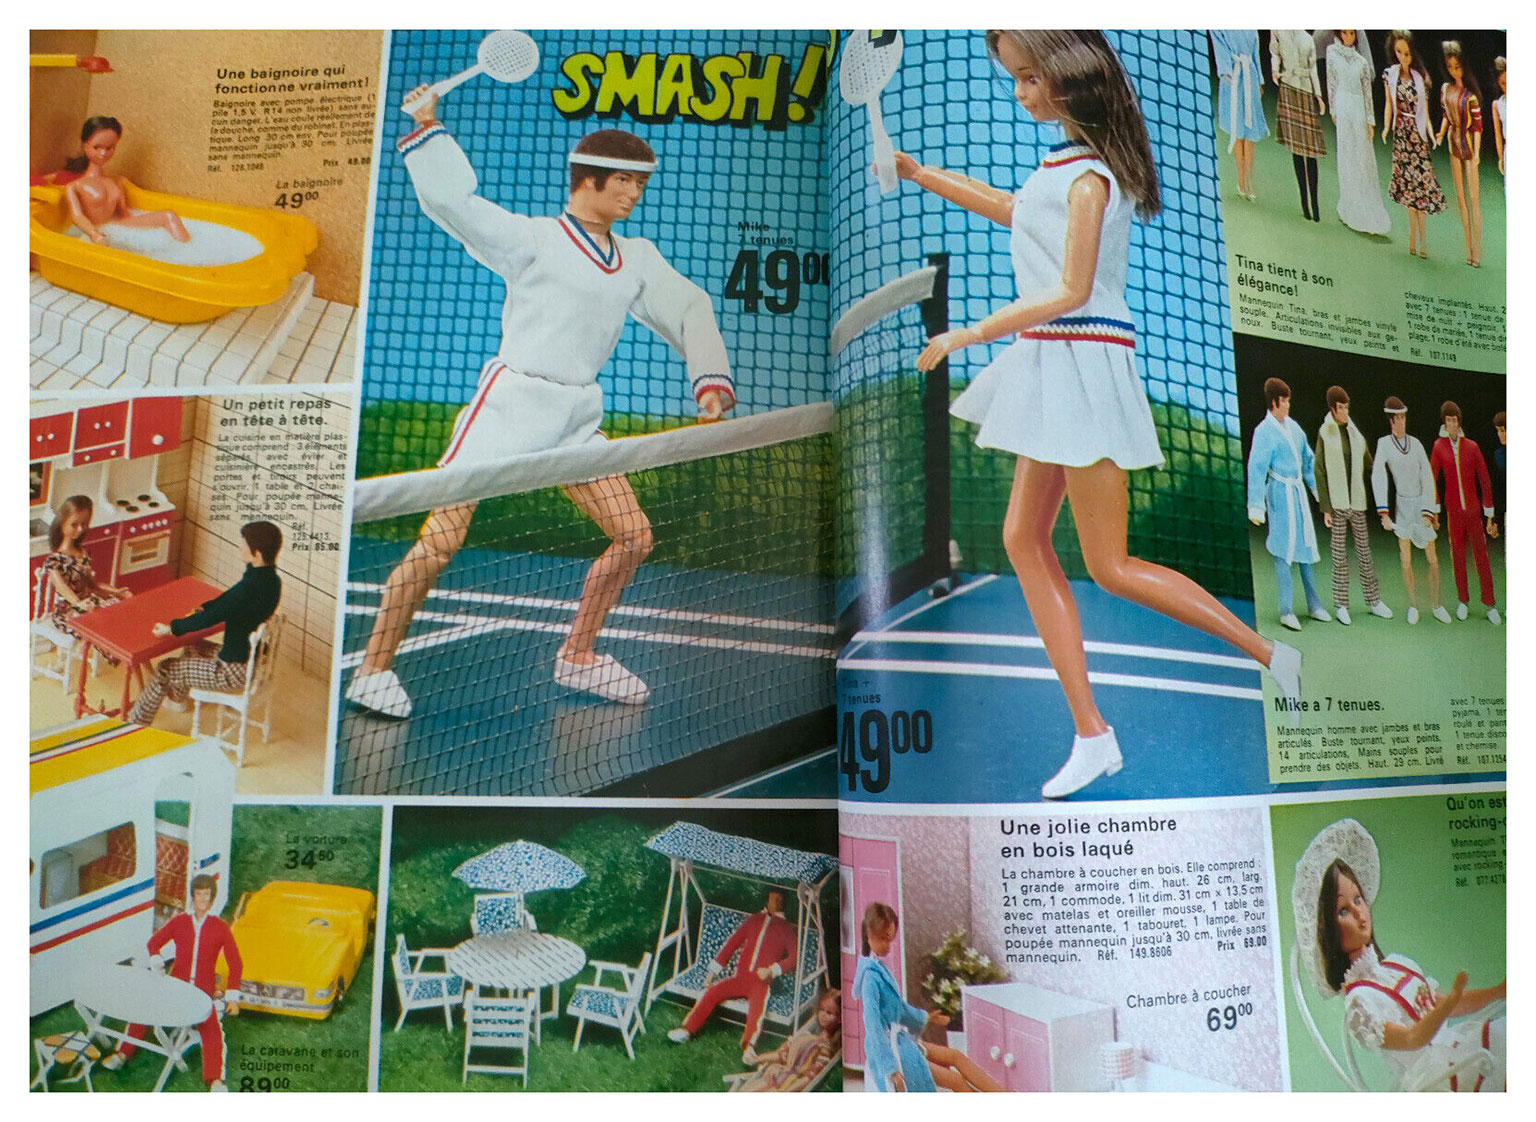 From 1980-81 French La Redoute catalogue